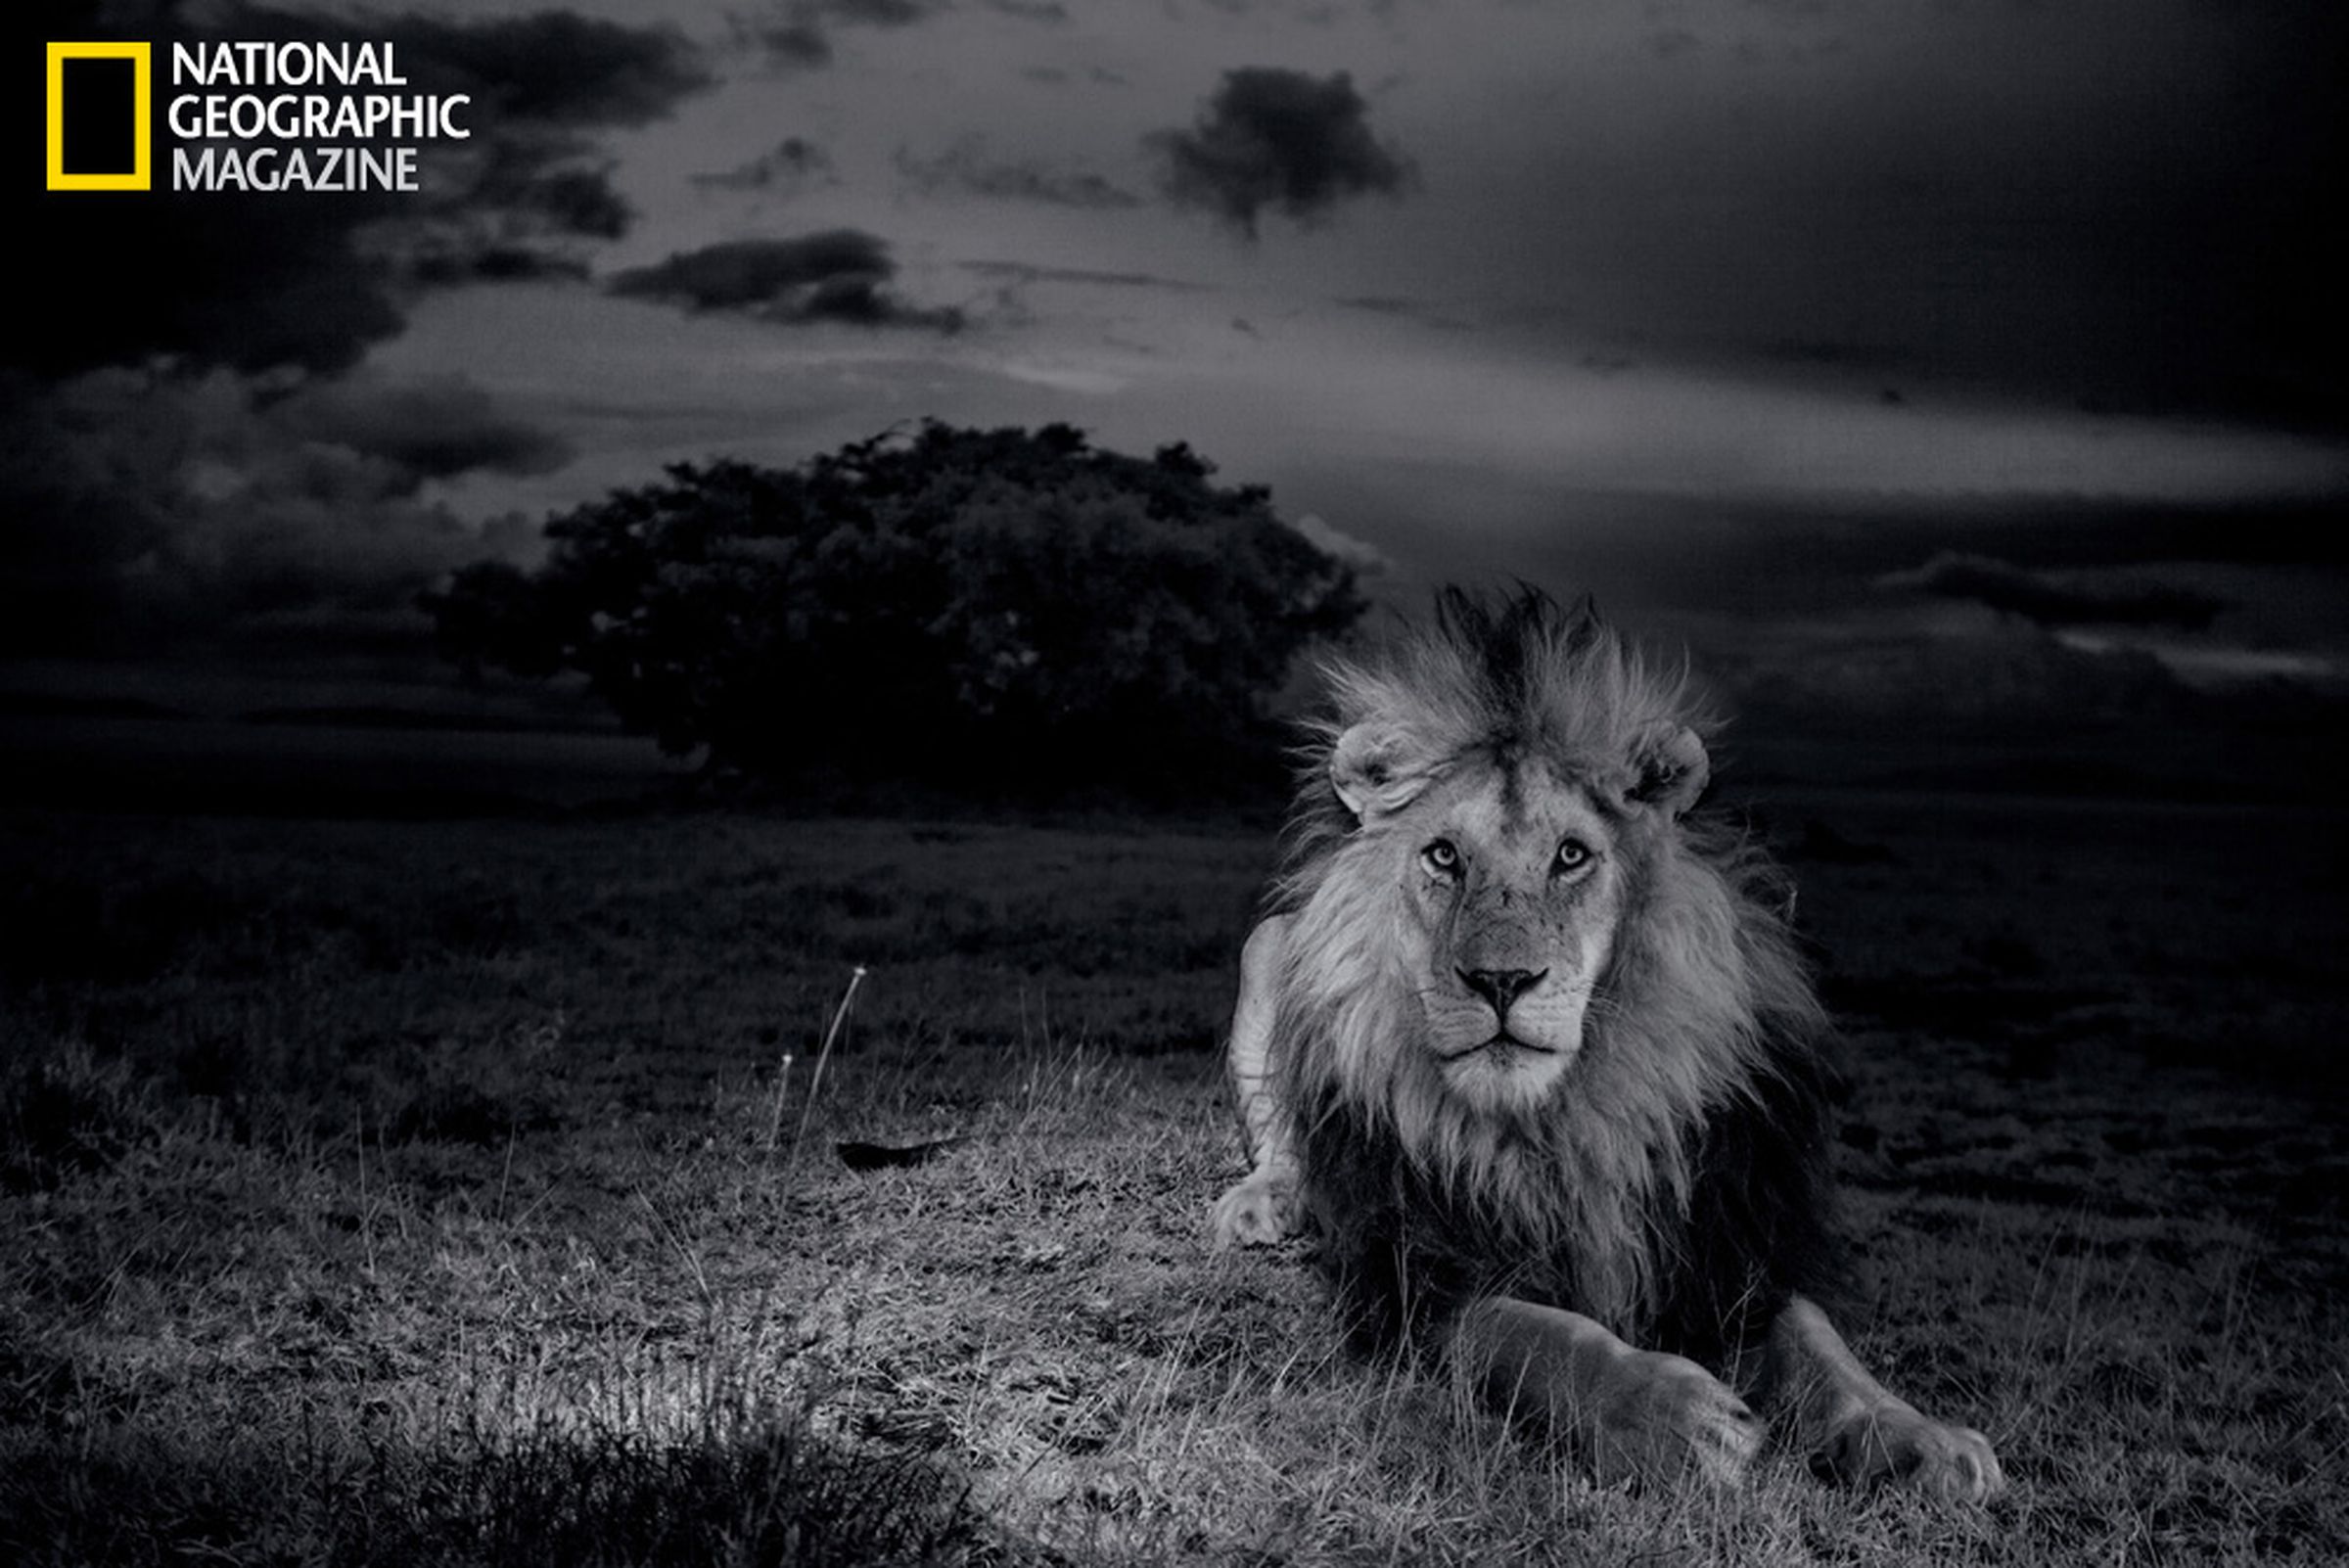 National Geographic photos of Serengeti lions 